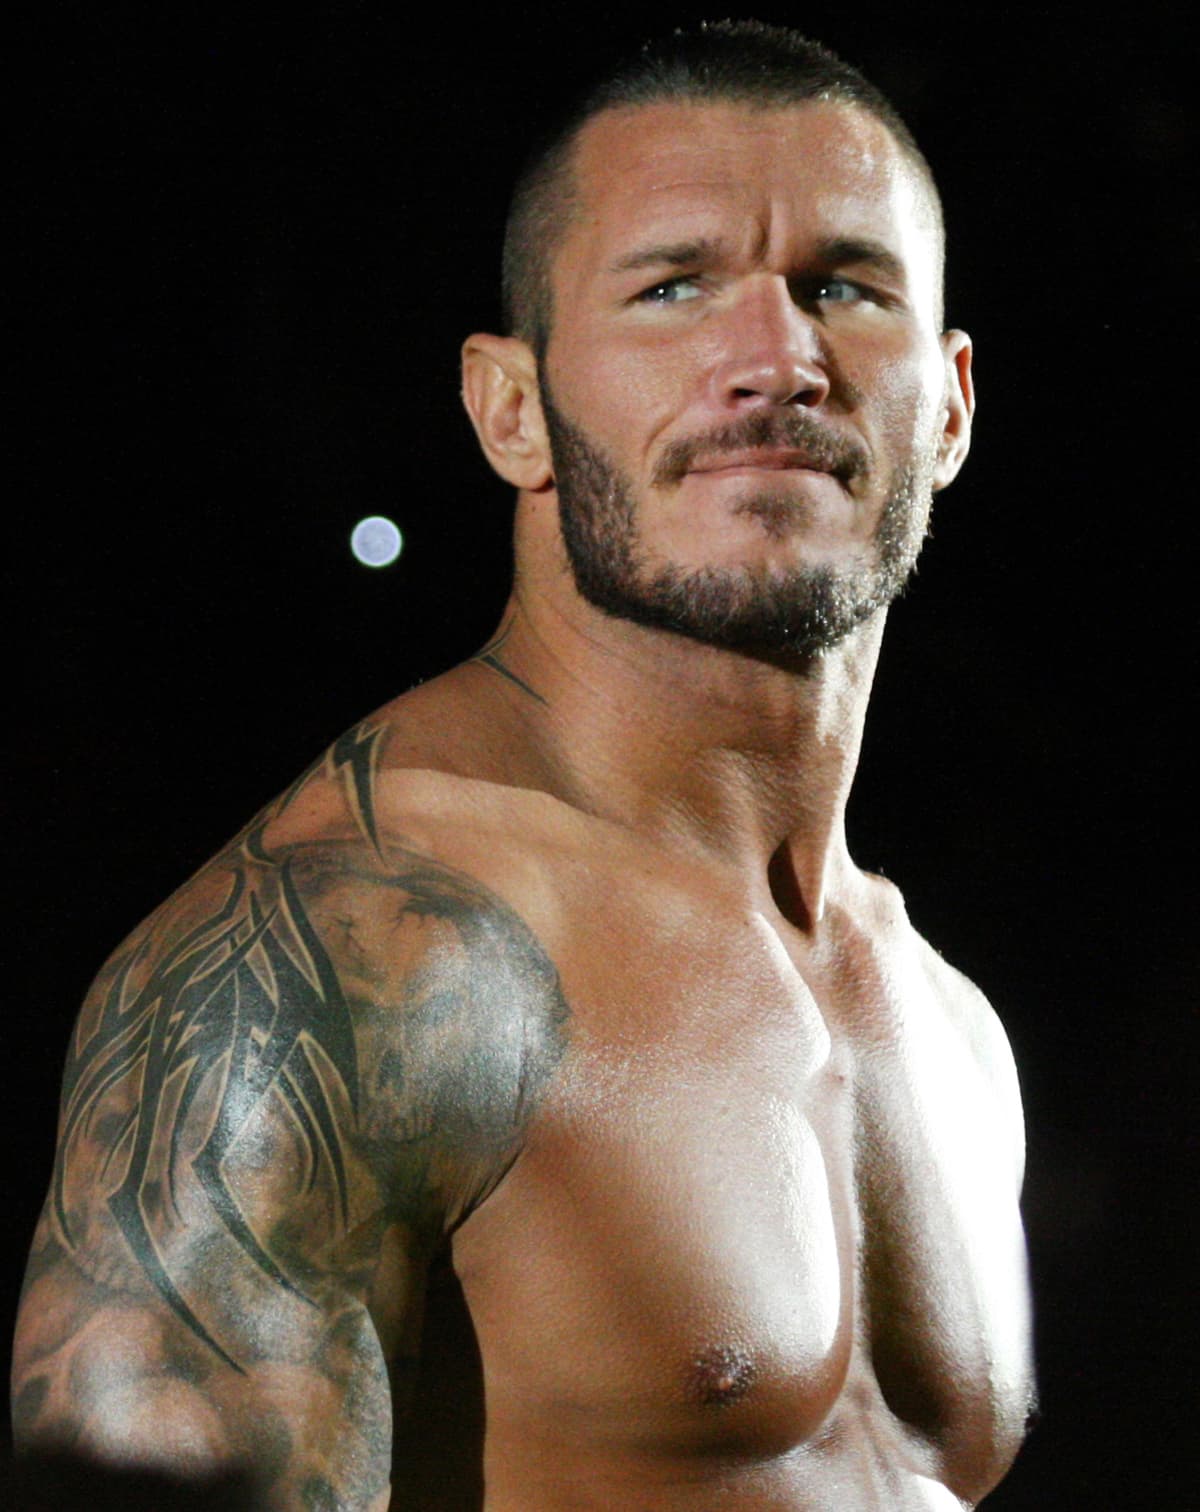 DURBAN, SOUTH AFRICA - JULY 08:  'The Viper' Randy Orton looks on during the WWE Smackdown Live Tour at Westridge Park Tennis Stadium on July 08, 2011 in Durban, South Africa.  (Photo by Steve Haag/Gallo Images/Getty Images)